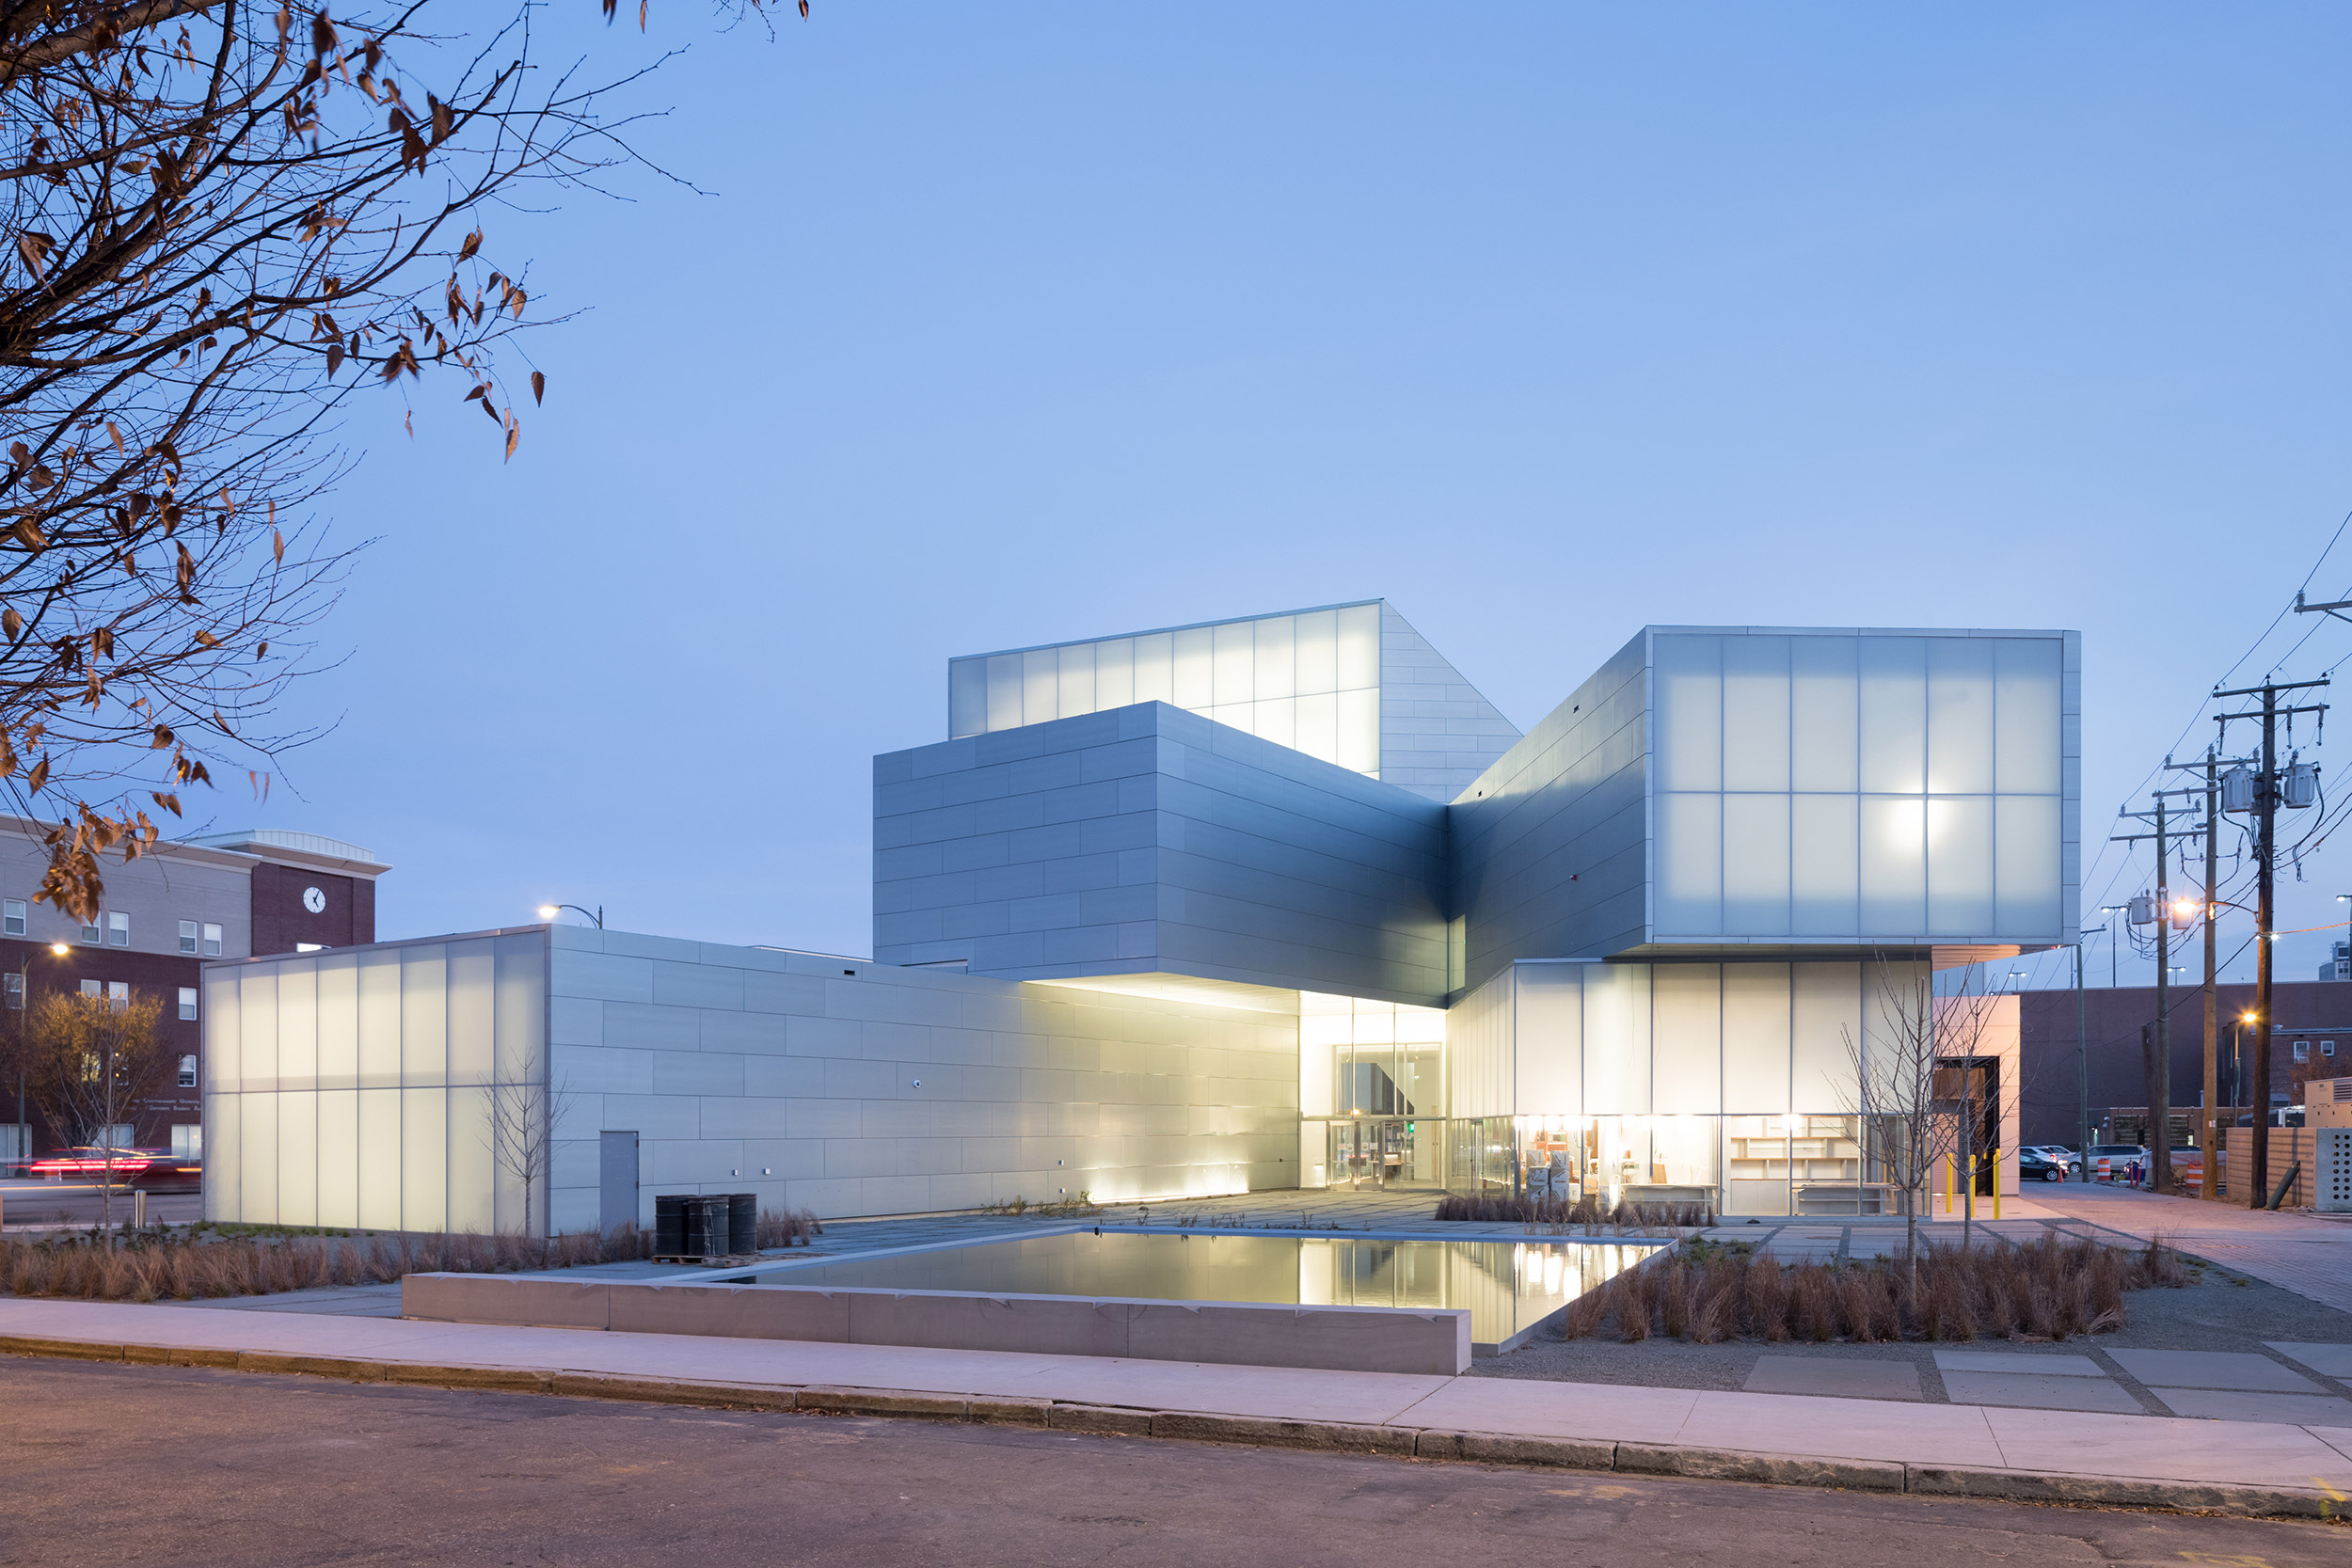 Virginia Commonwealth University Institute for Contemporary Art by Steven Holl Architects; BCWH; and Michael Boucher Landscape Architecture. Photo: Iwan Baan.